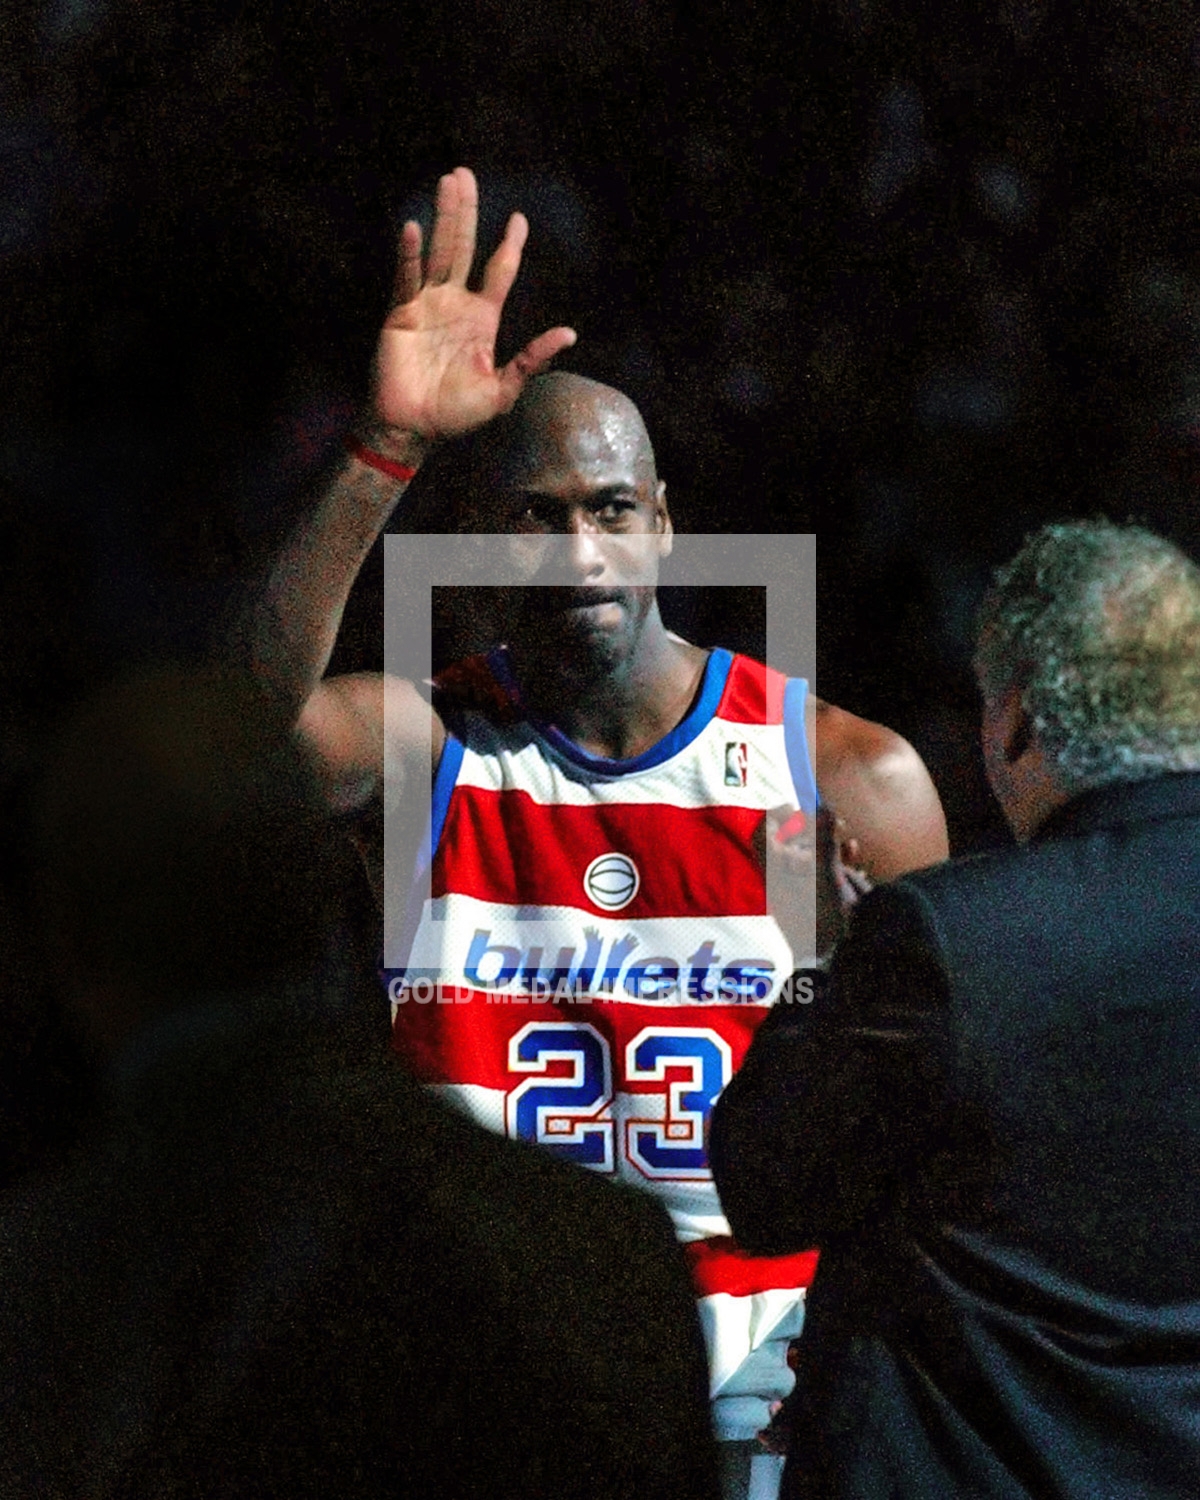 Washinton Wizards Michael Jordan waves goodby to his fans after his final home game against the New York Knicks at the MCI Center. Michael scored twenty-one points in a losing effort 79-93.